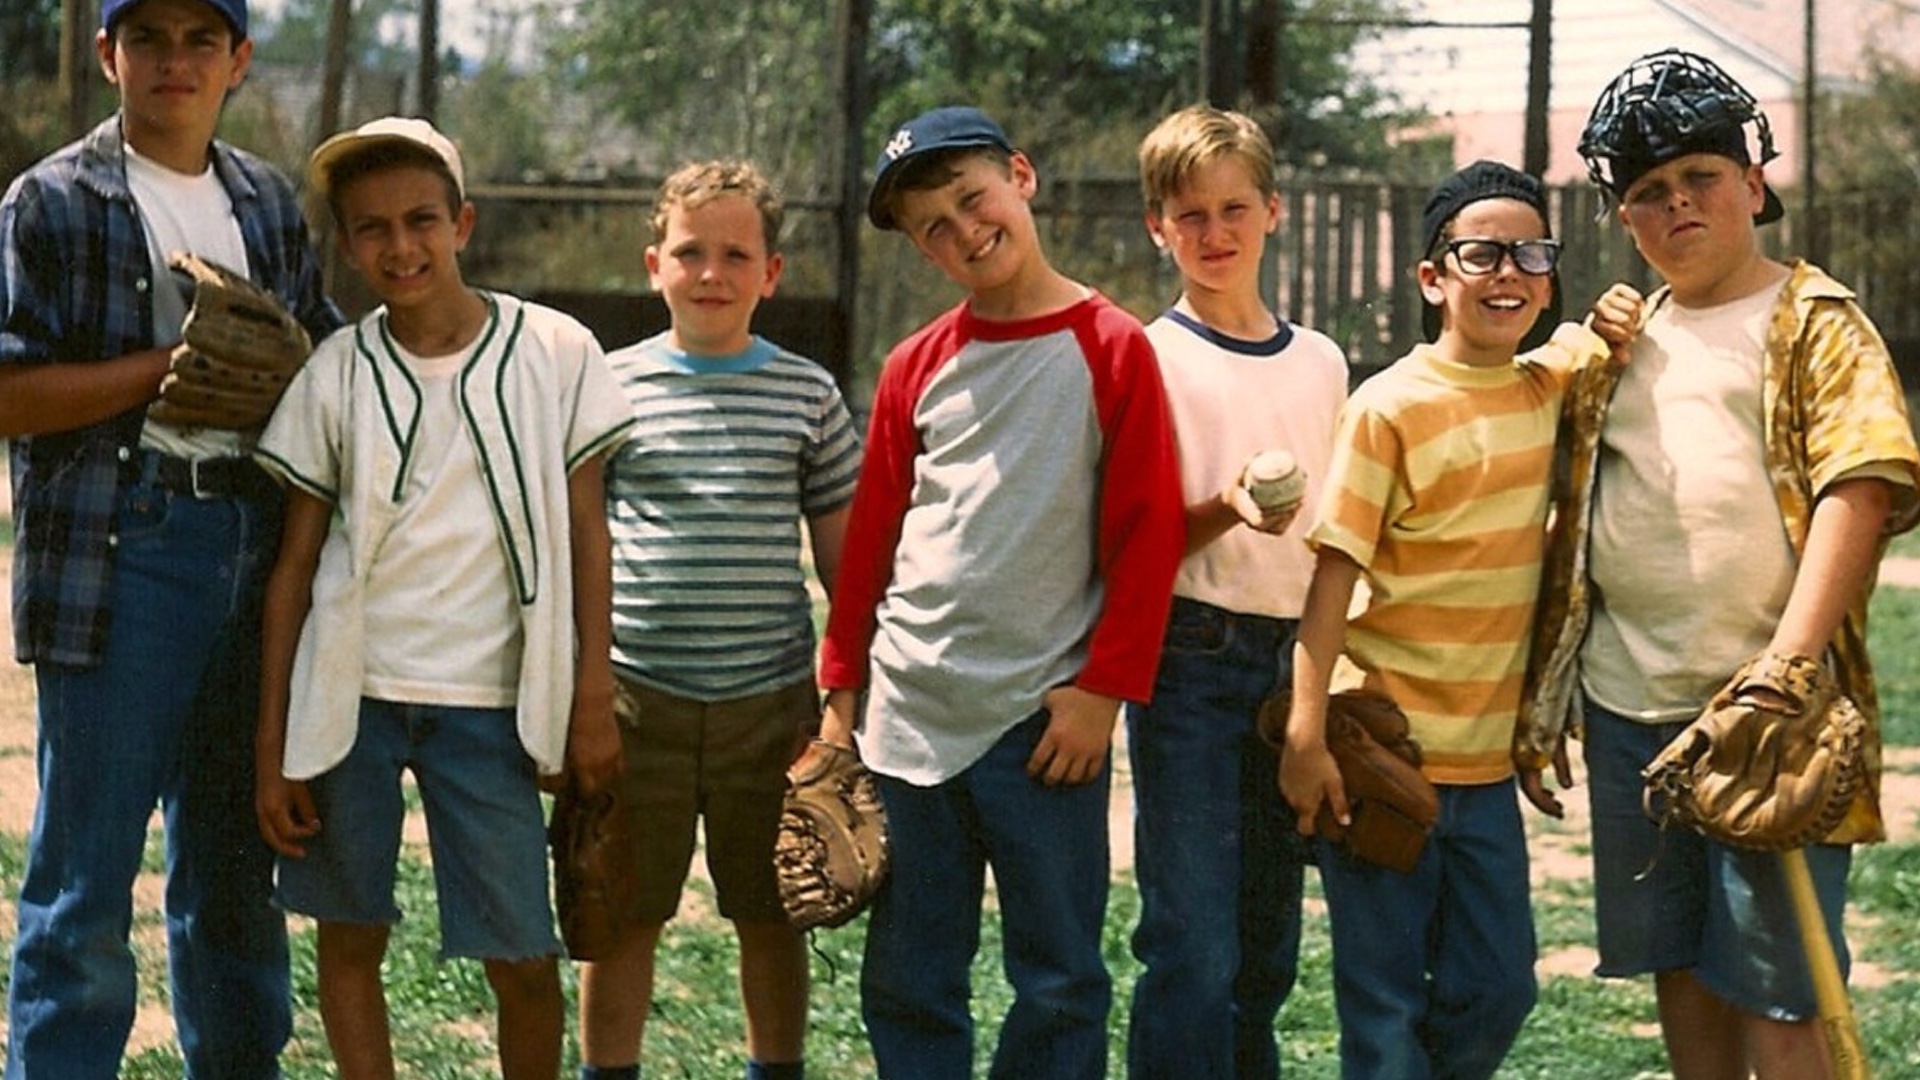 The Sandlot' is returning as a TV series, with the original cast